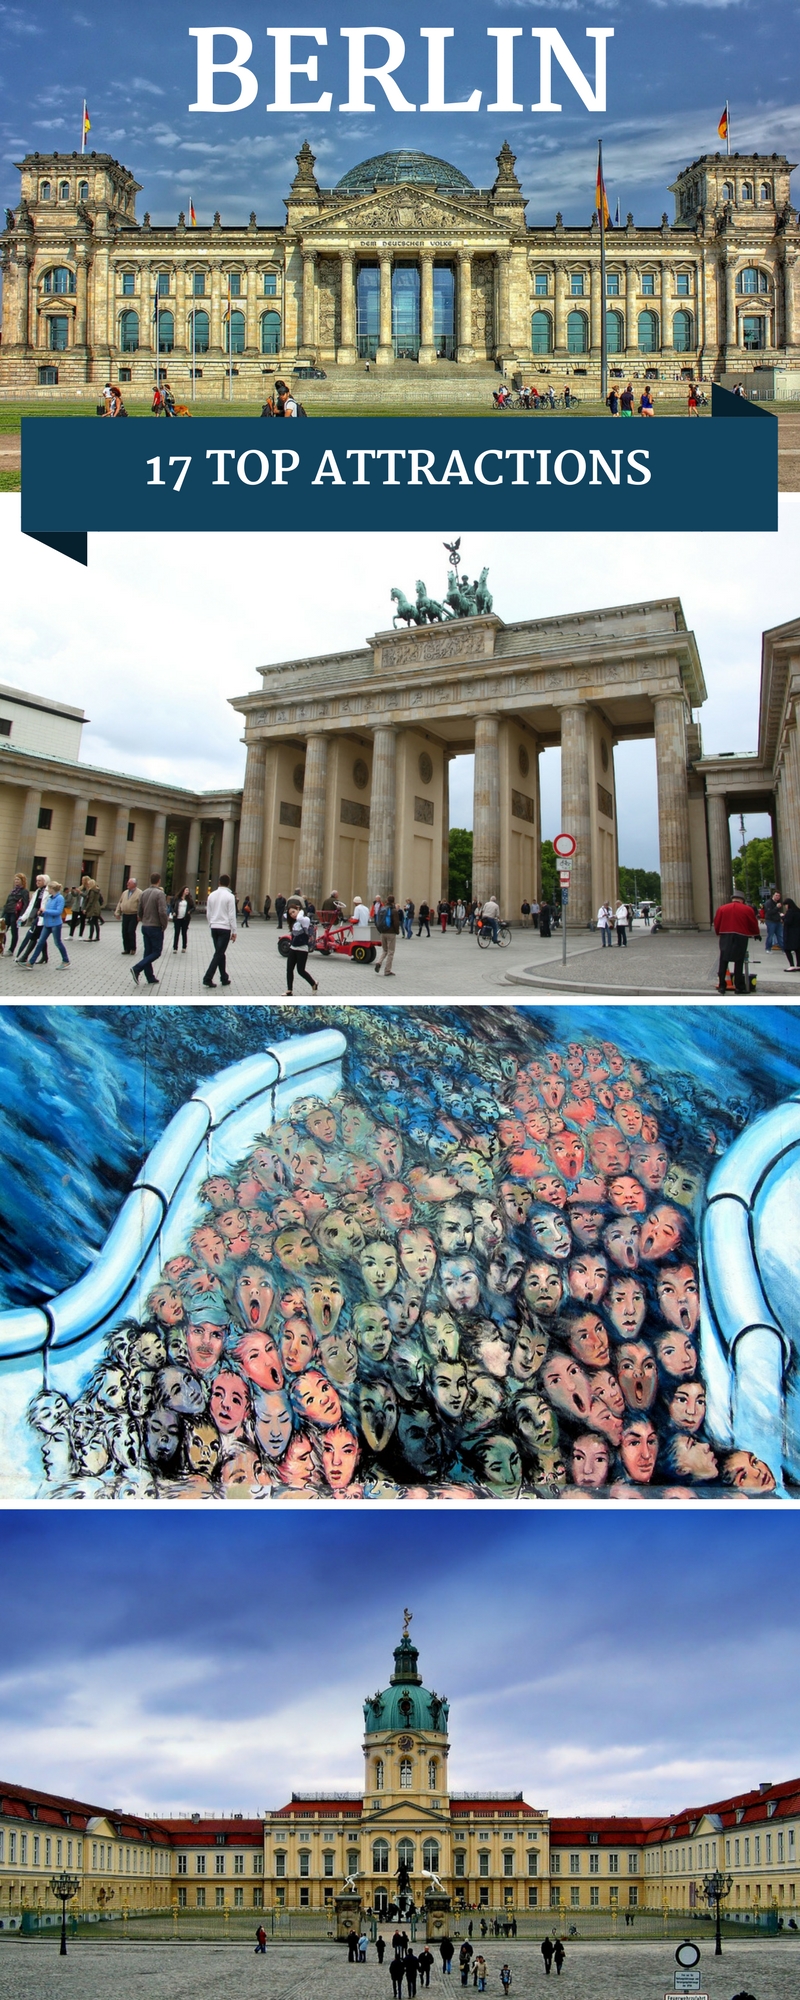 17 top attractions in Berlin to include on your travel itinerary on your first visit